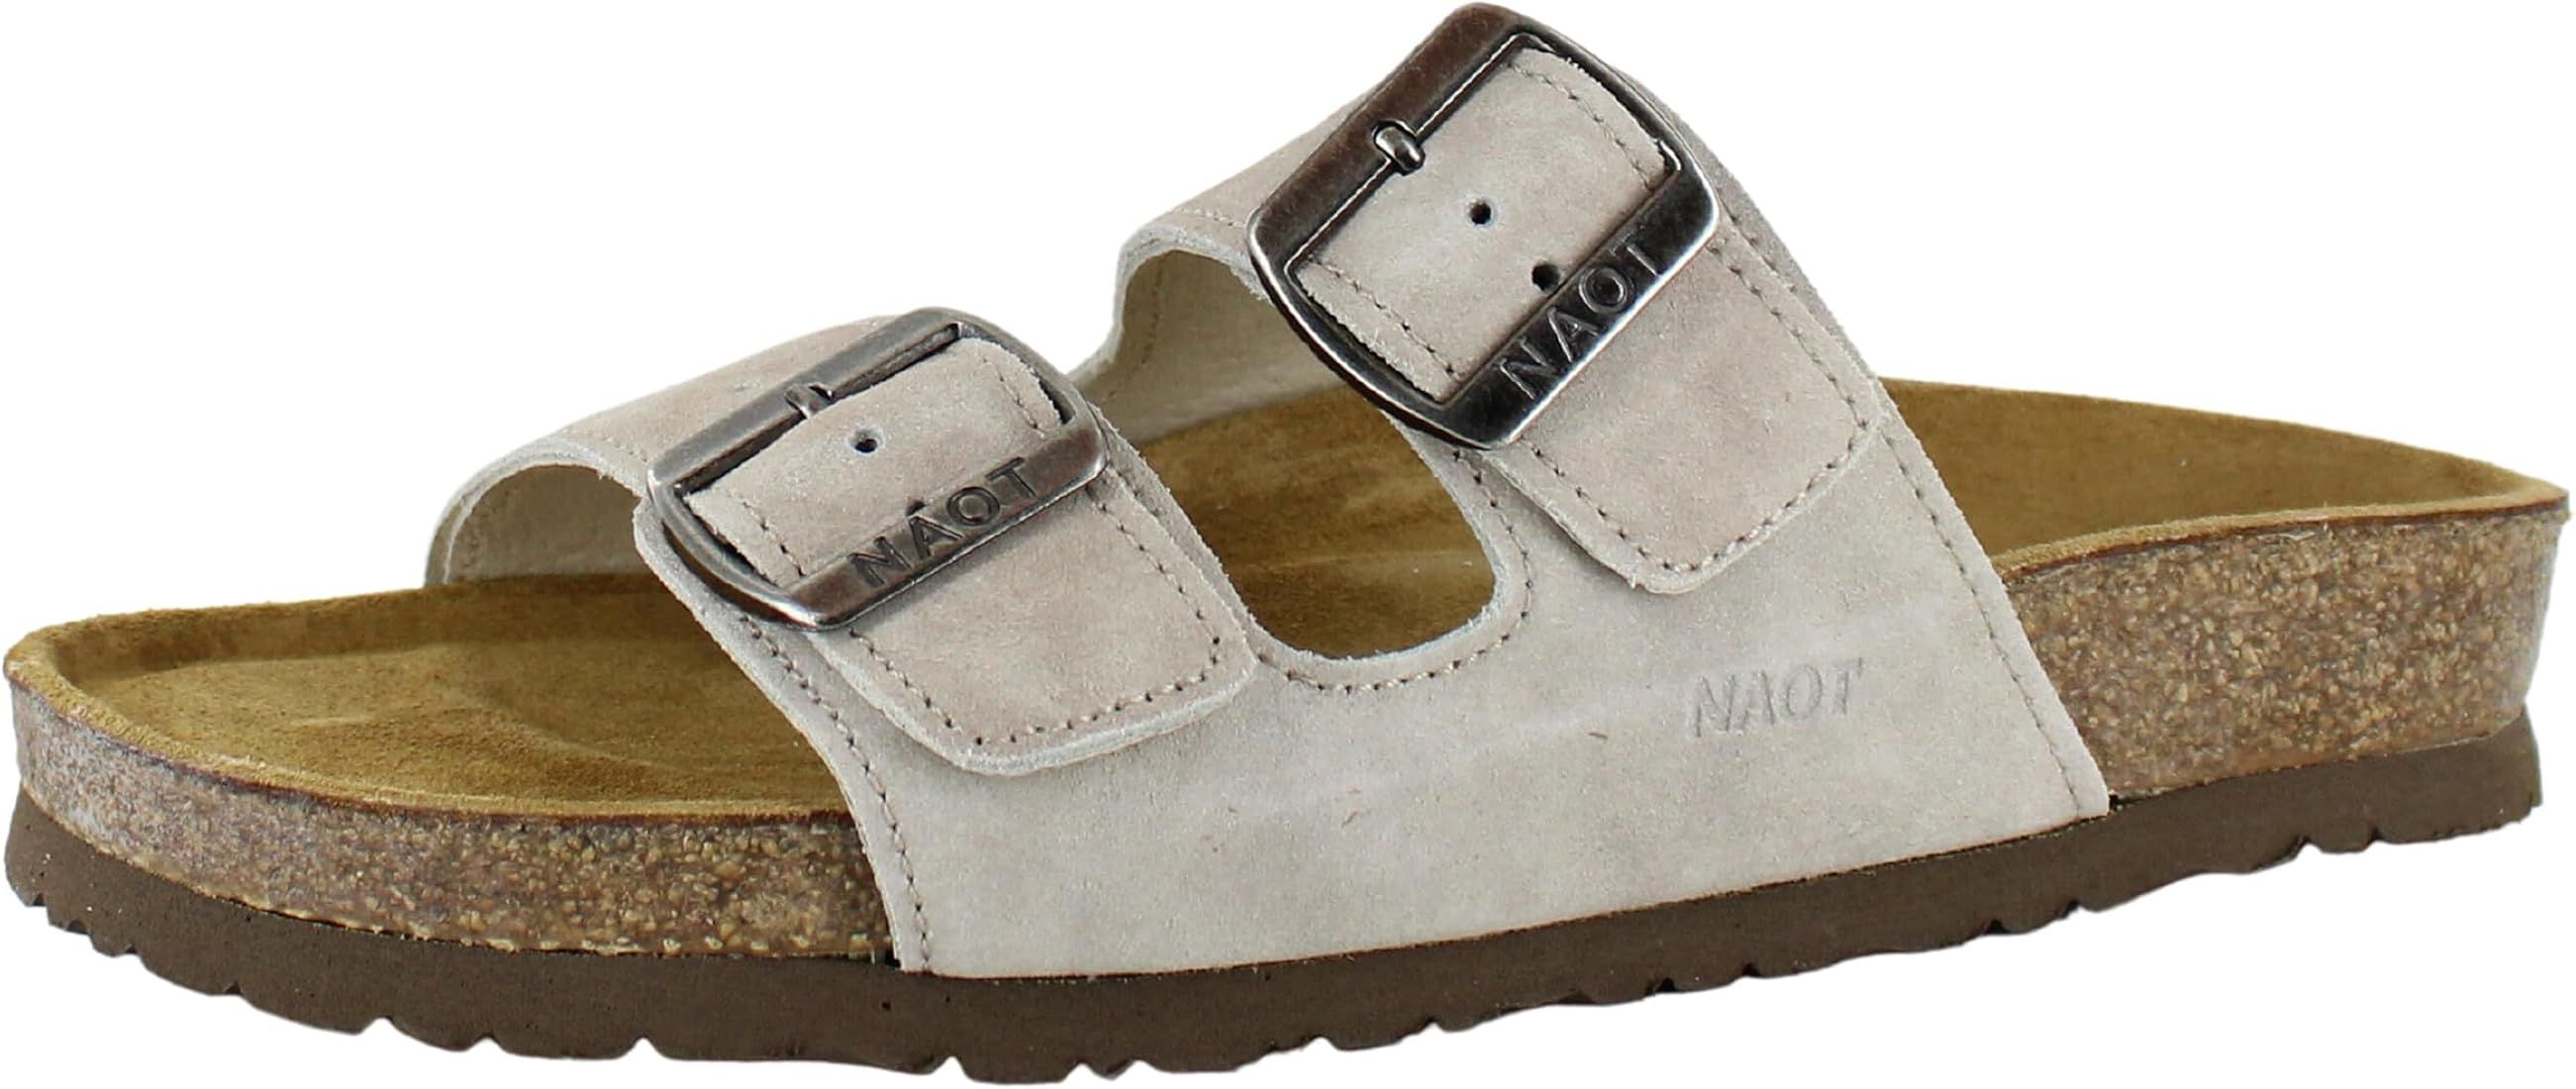 NAOT Footwear Santa Barbara Women's Slide with Cork Footbed and Arch Comfort and Support – Slip... | Amazon (US)